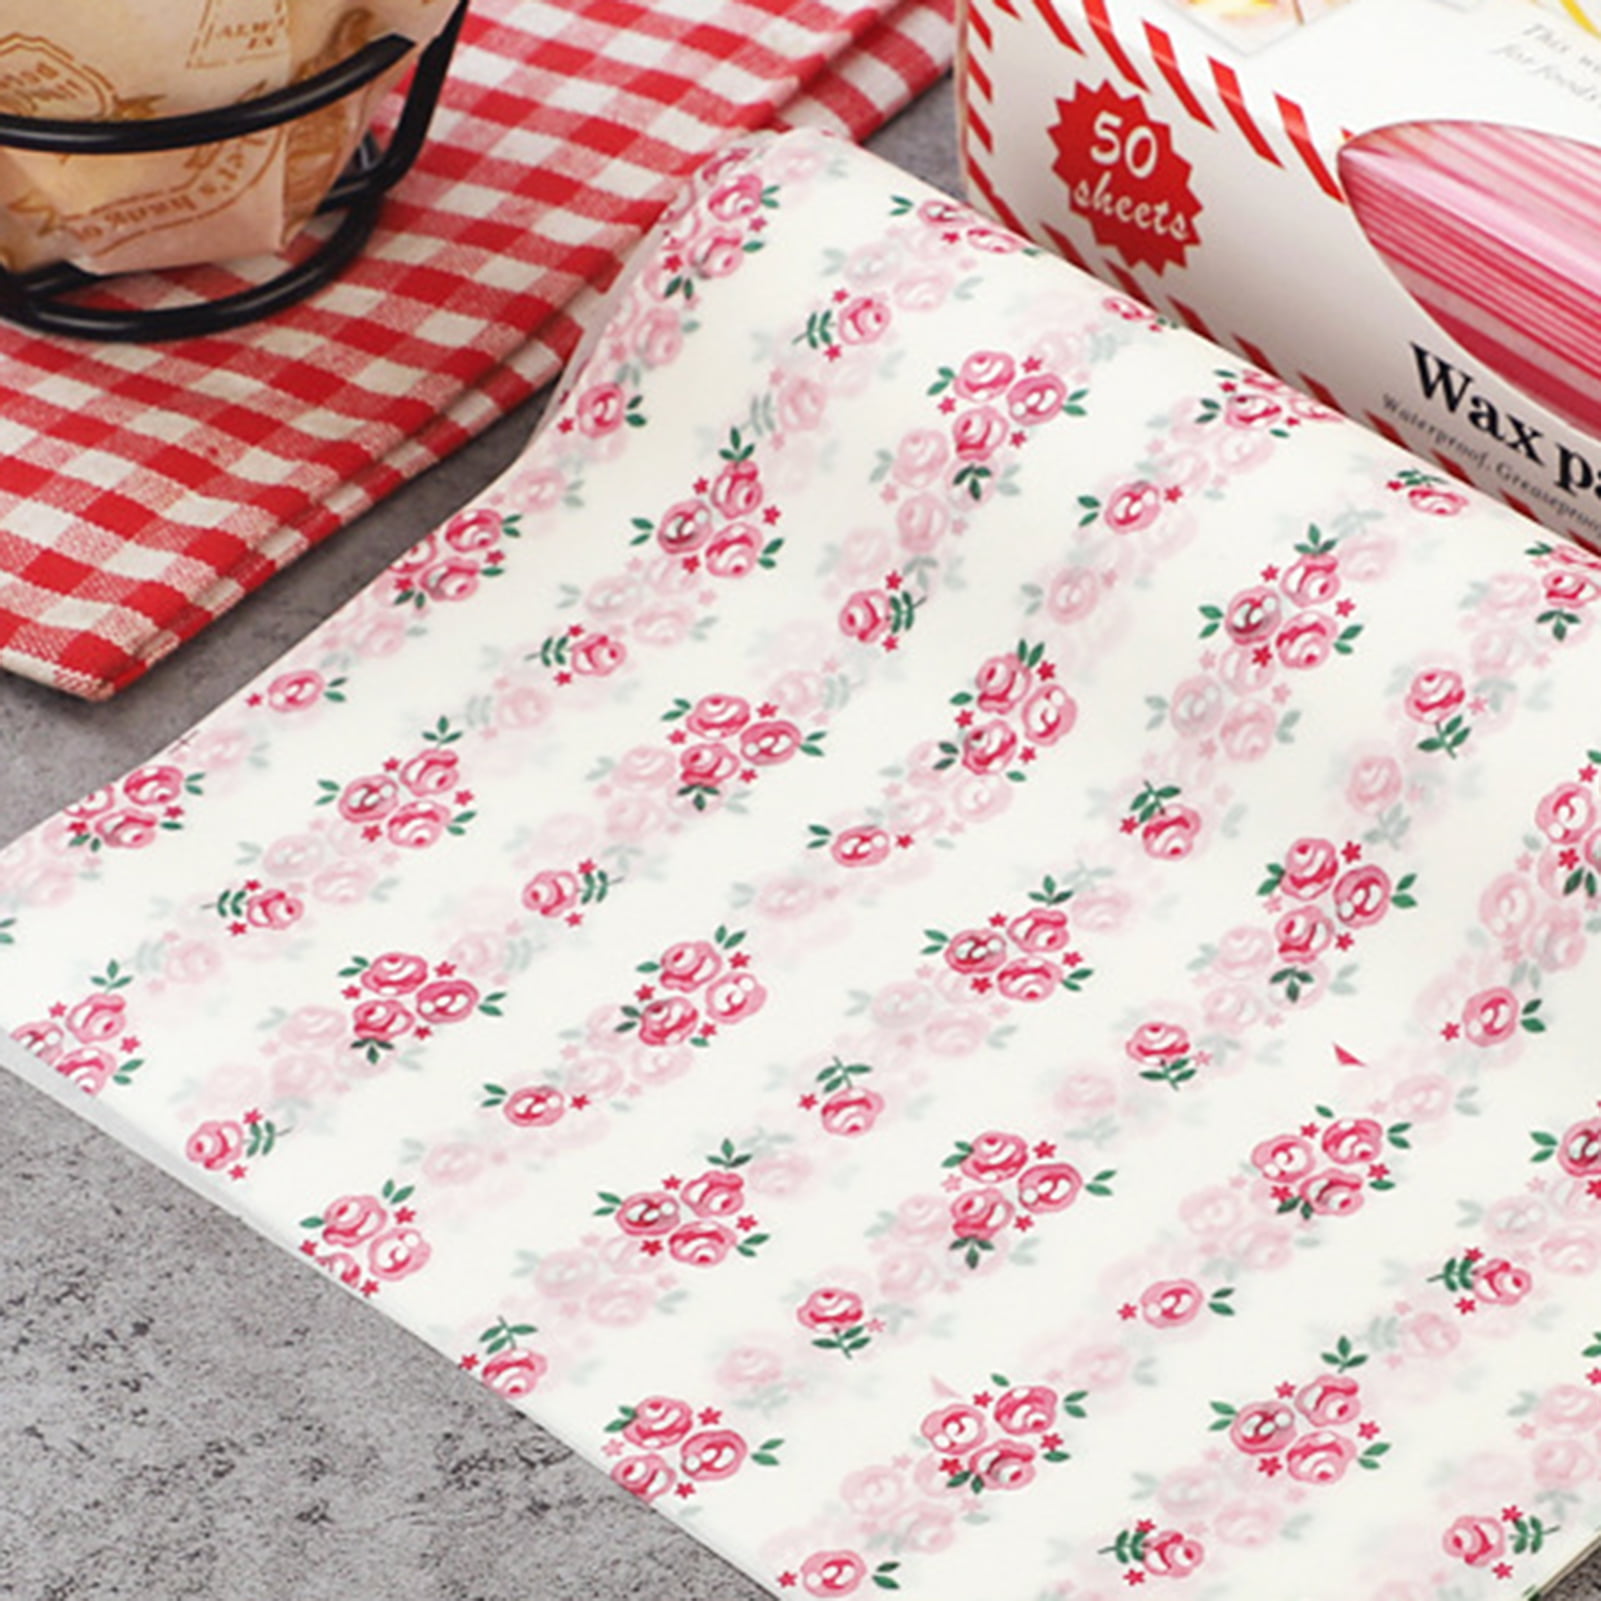 Cheer.US [50 Pcs] Food and Deli Dry Wrap Wax Paper Sheets, Heavy Duty Heart  Pattern Non Stick Food Wrapping Baking Paper for Cooking, Air Fryer,  Kitchens Paper Roll, 9.84 x 8.46 